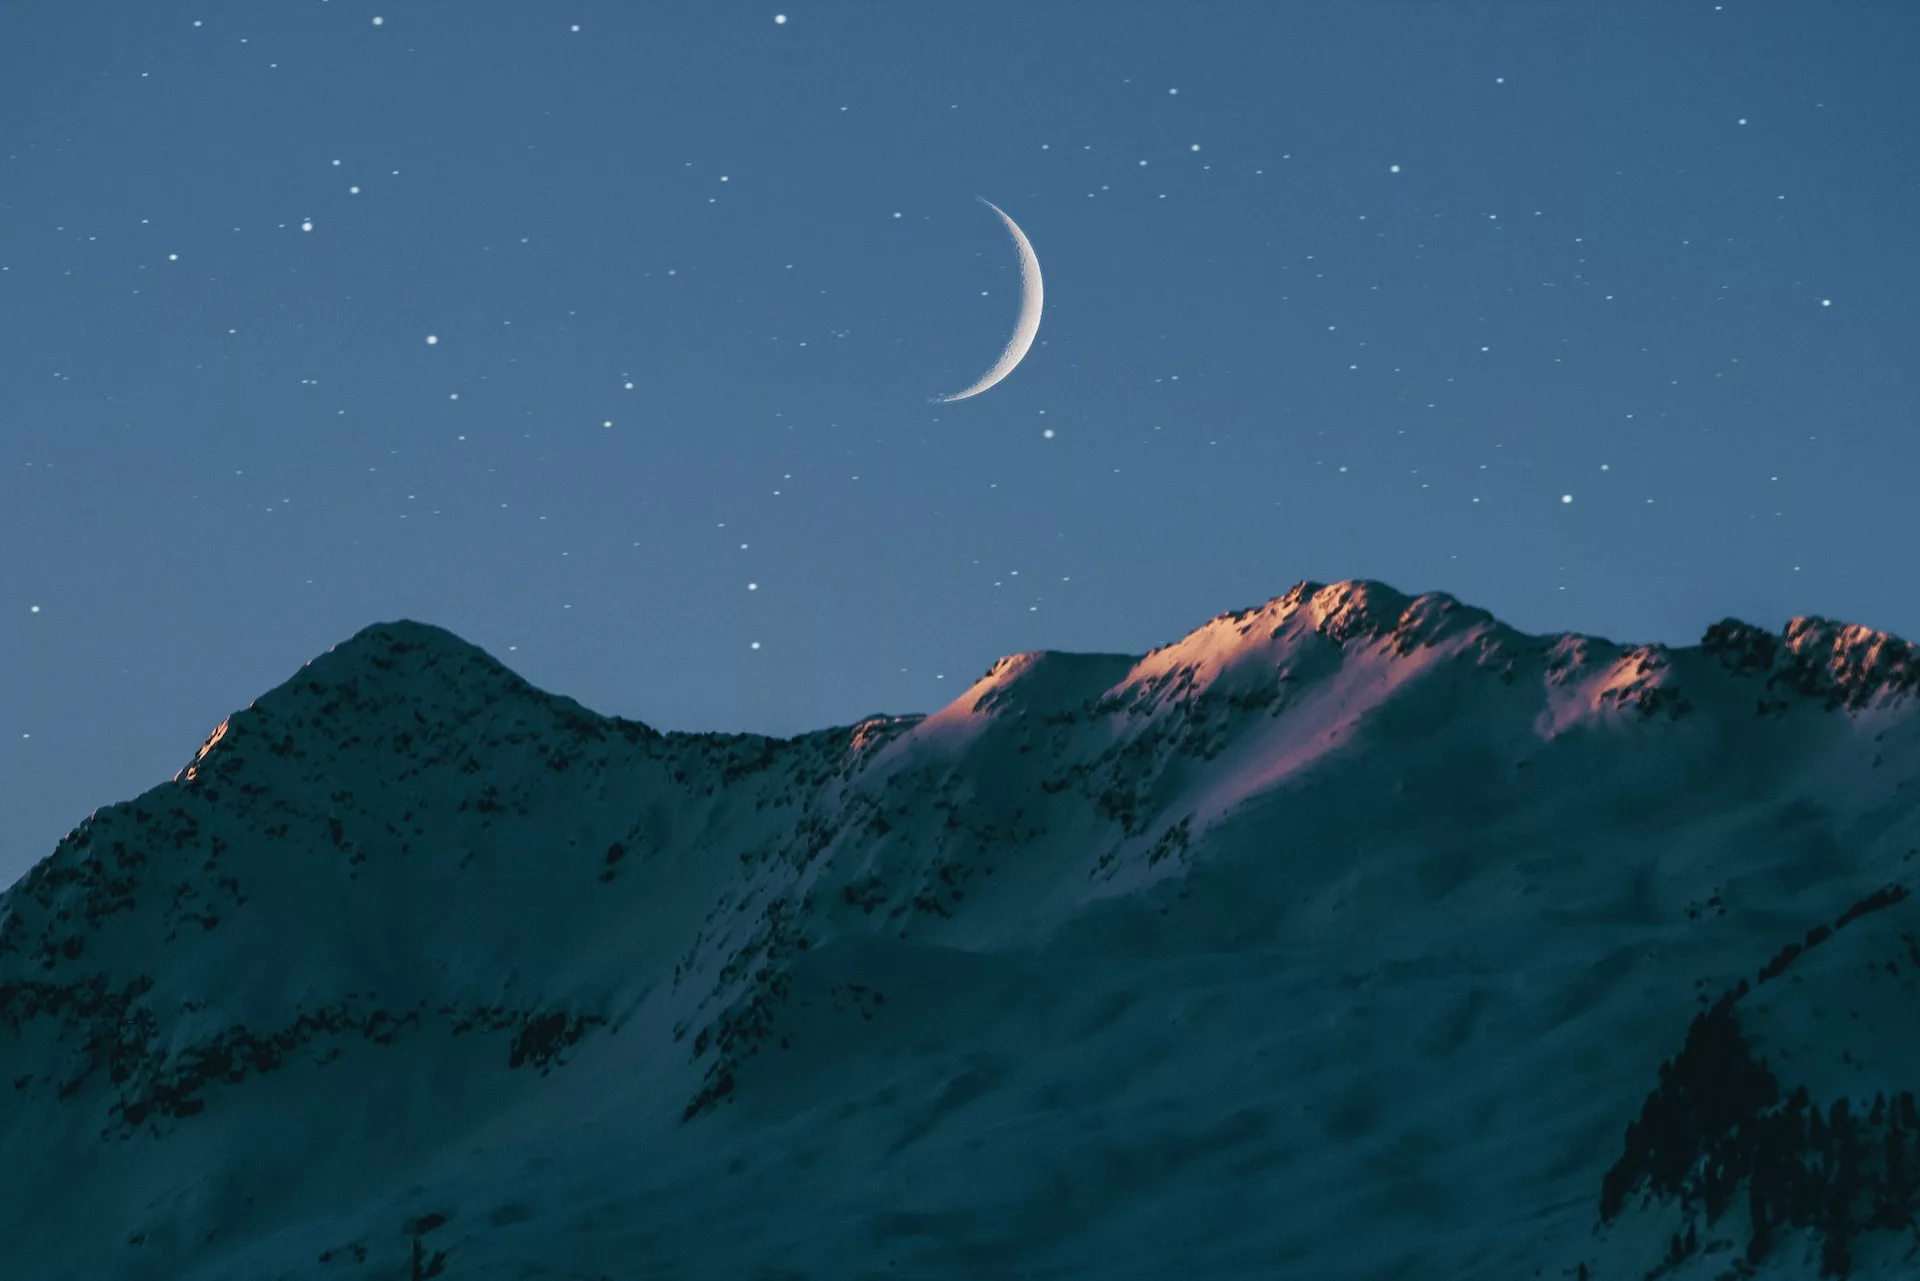 A crescent moon over mountains.